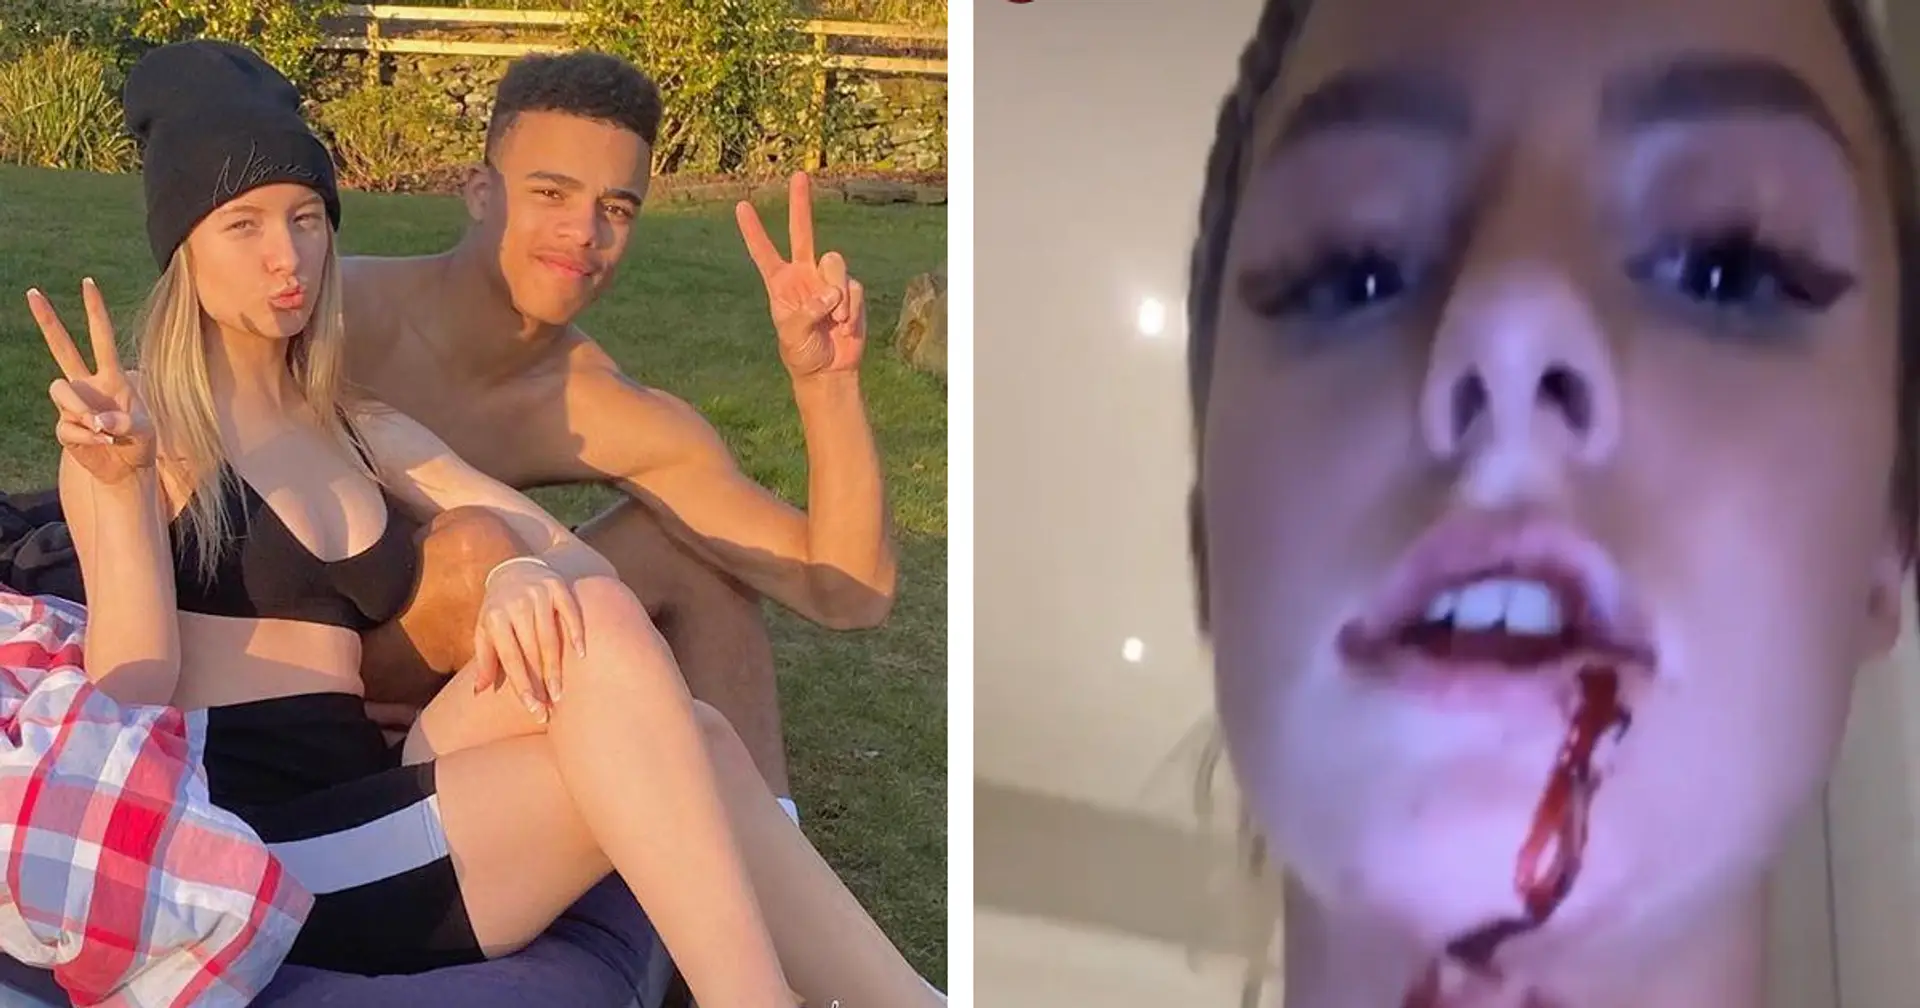 Greenwood's girlfriend shares shocking photos of beatings, leaks audio of Mason forcing himself on her